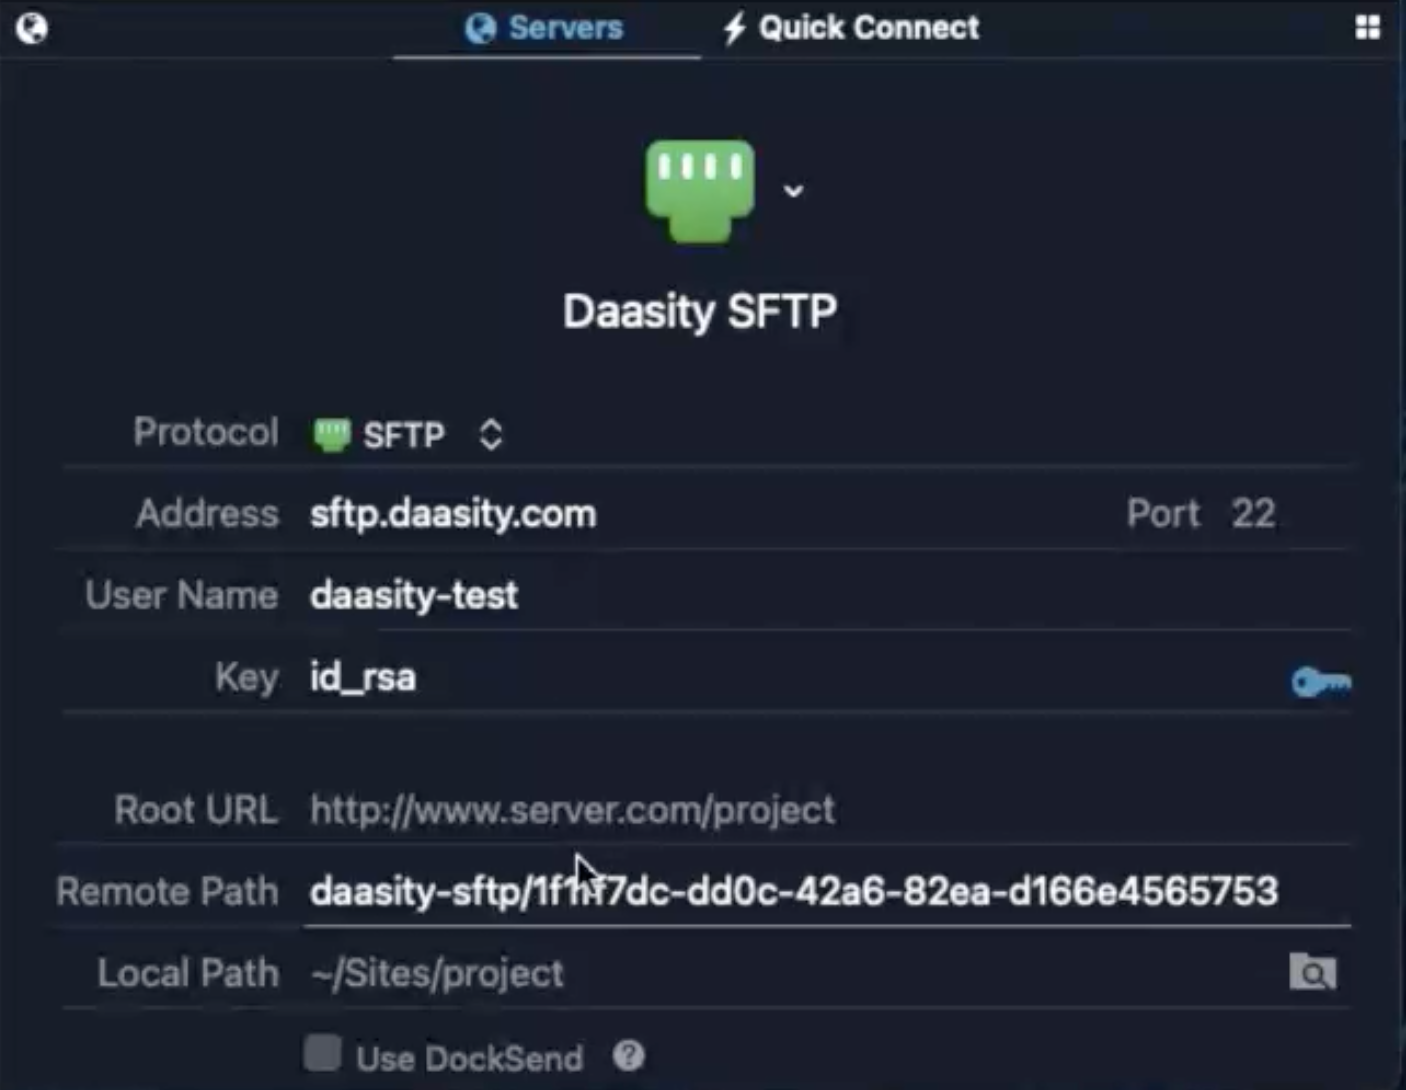 How to Send Data to Daasity SFTP - Path